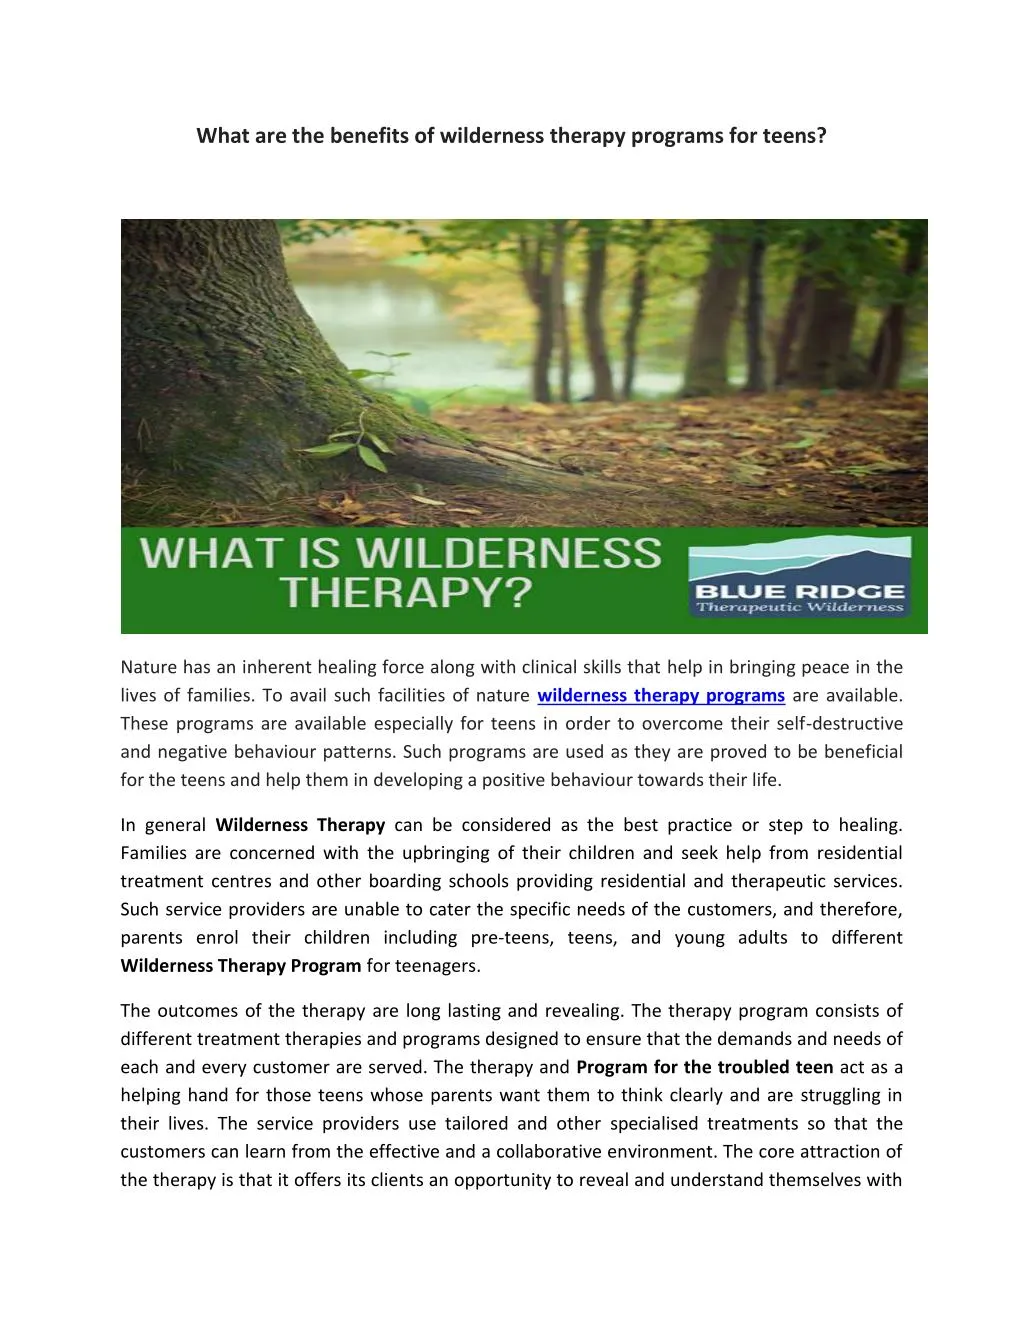 what are the benefits of wilderness therapy